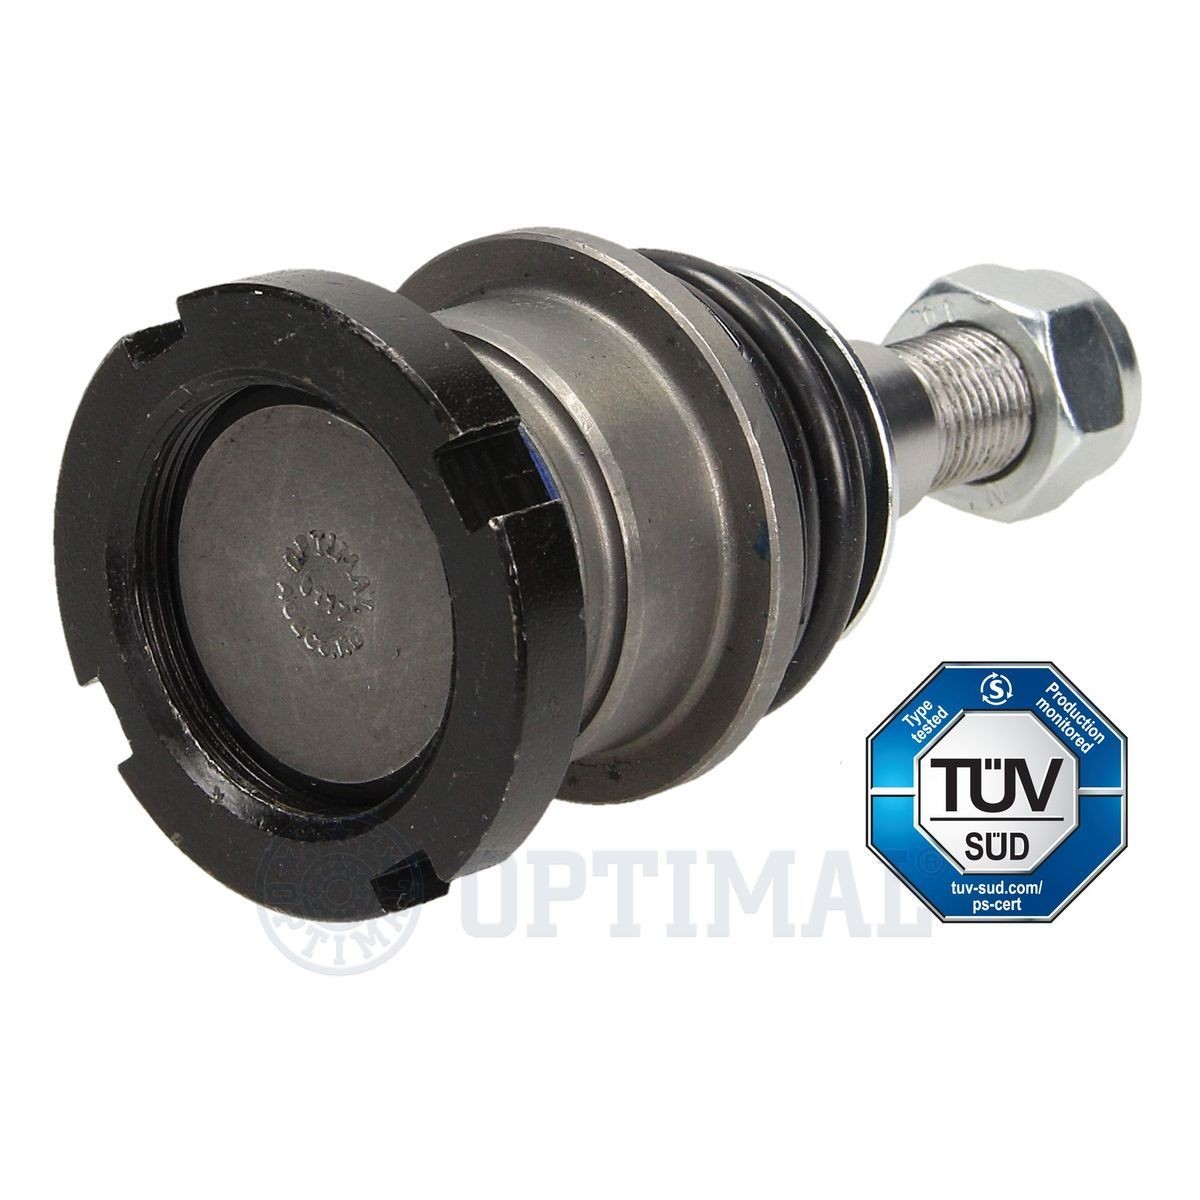 OPTIMAL Ball joint in suspension G3-999 suitable for MERCEDES-BENZ ML-Class, R-Class, GL